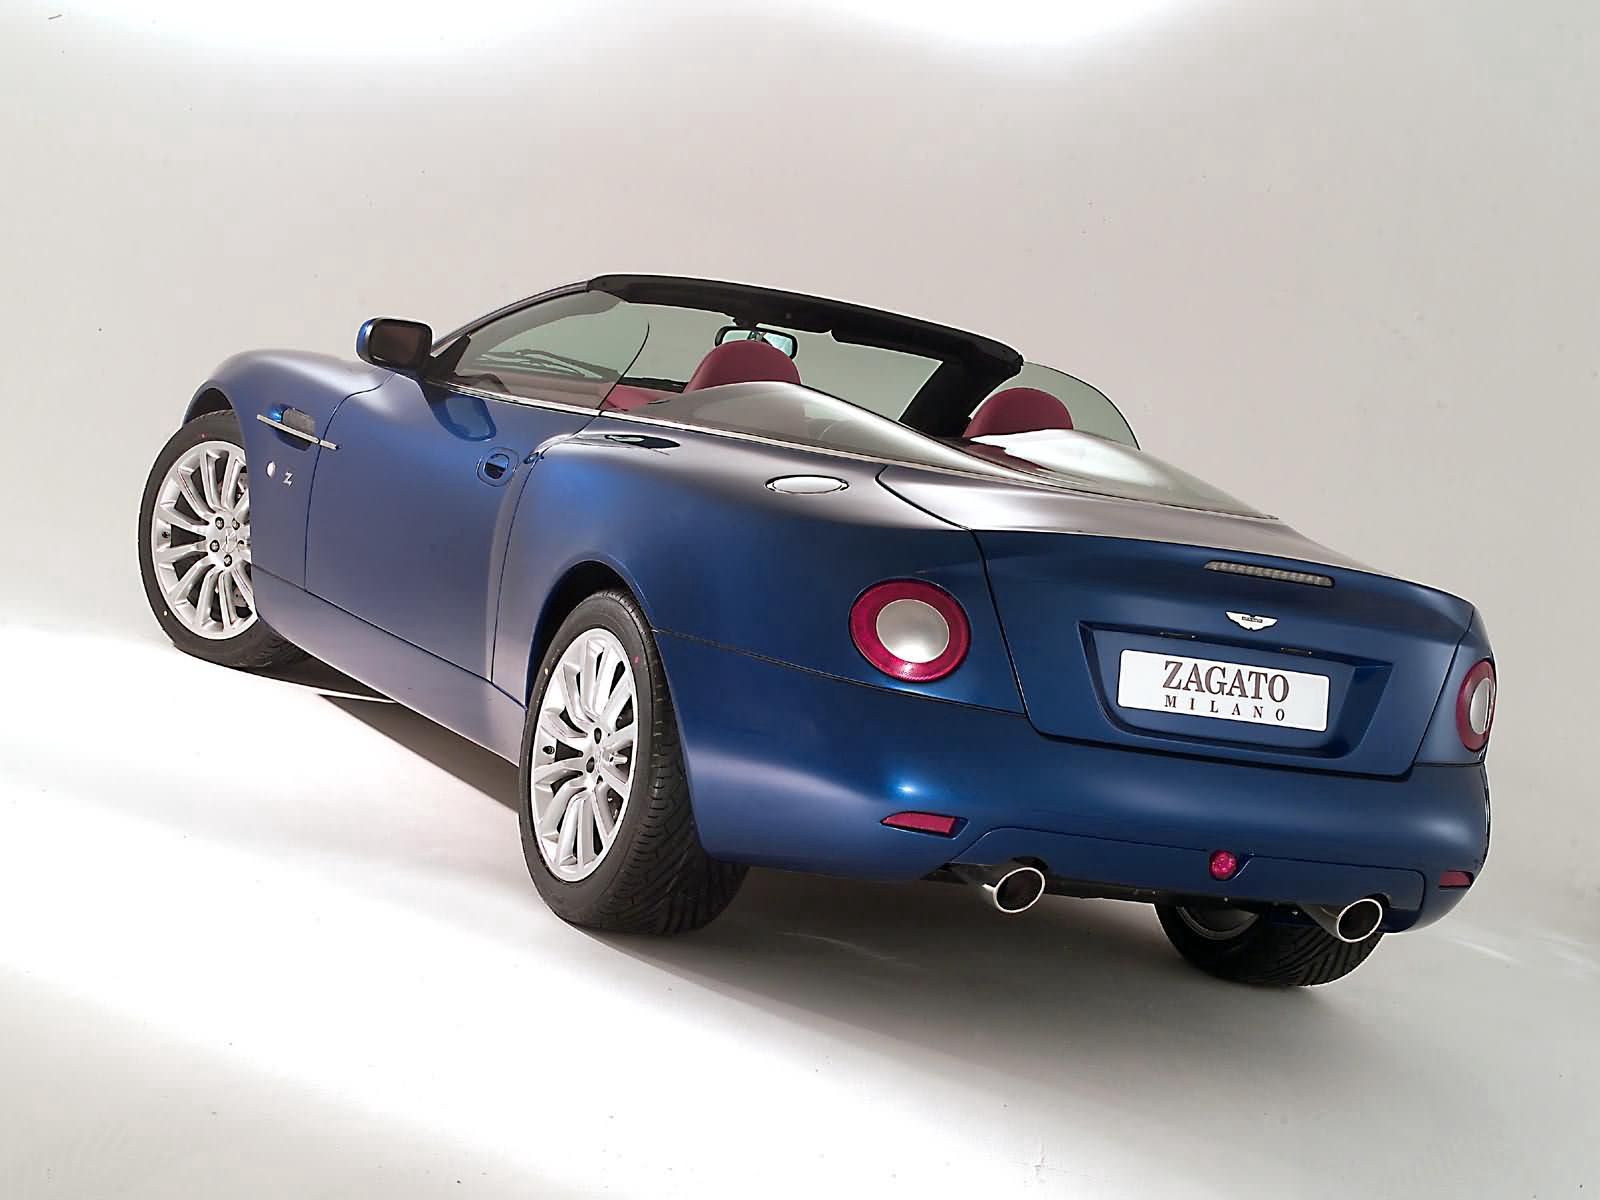 cars, auto, aston martin, blue, back view, rear view, style, cabriolet, 2004, v12, vanquish